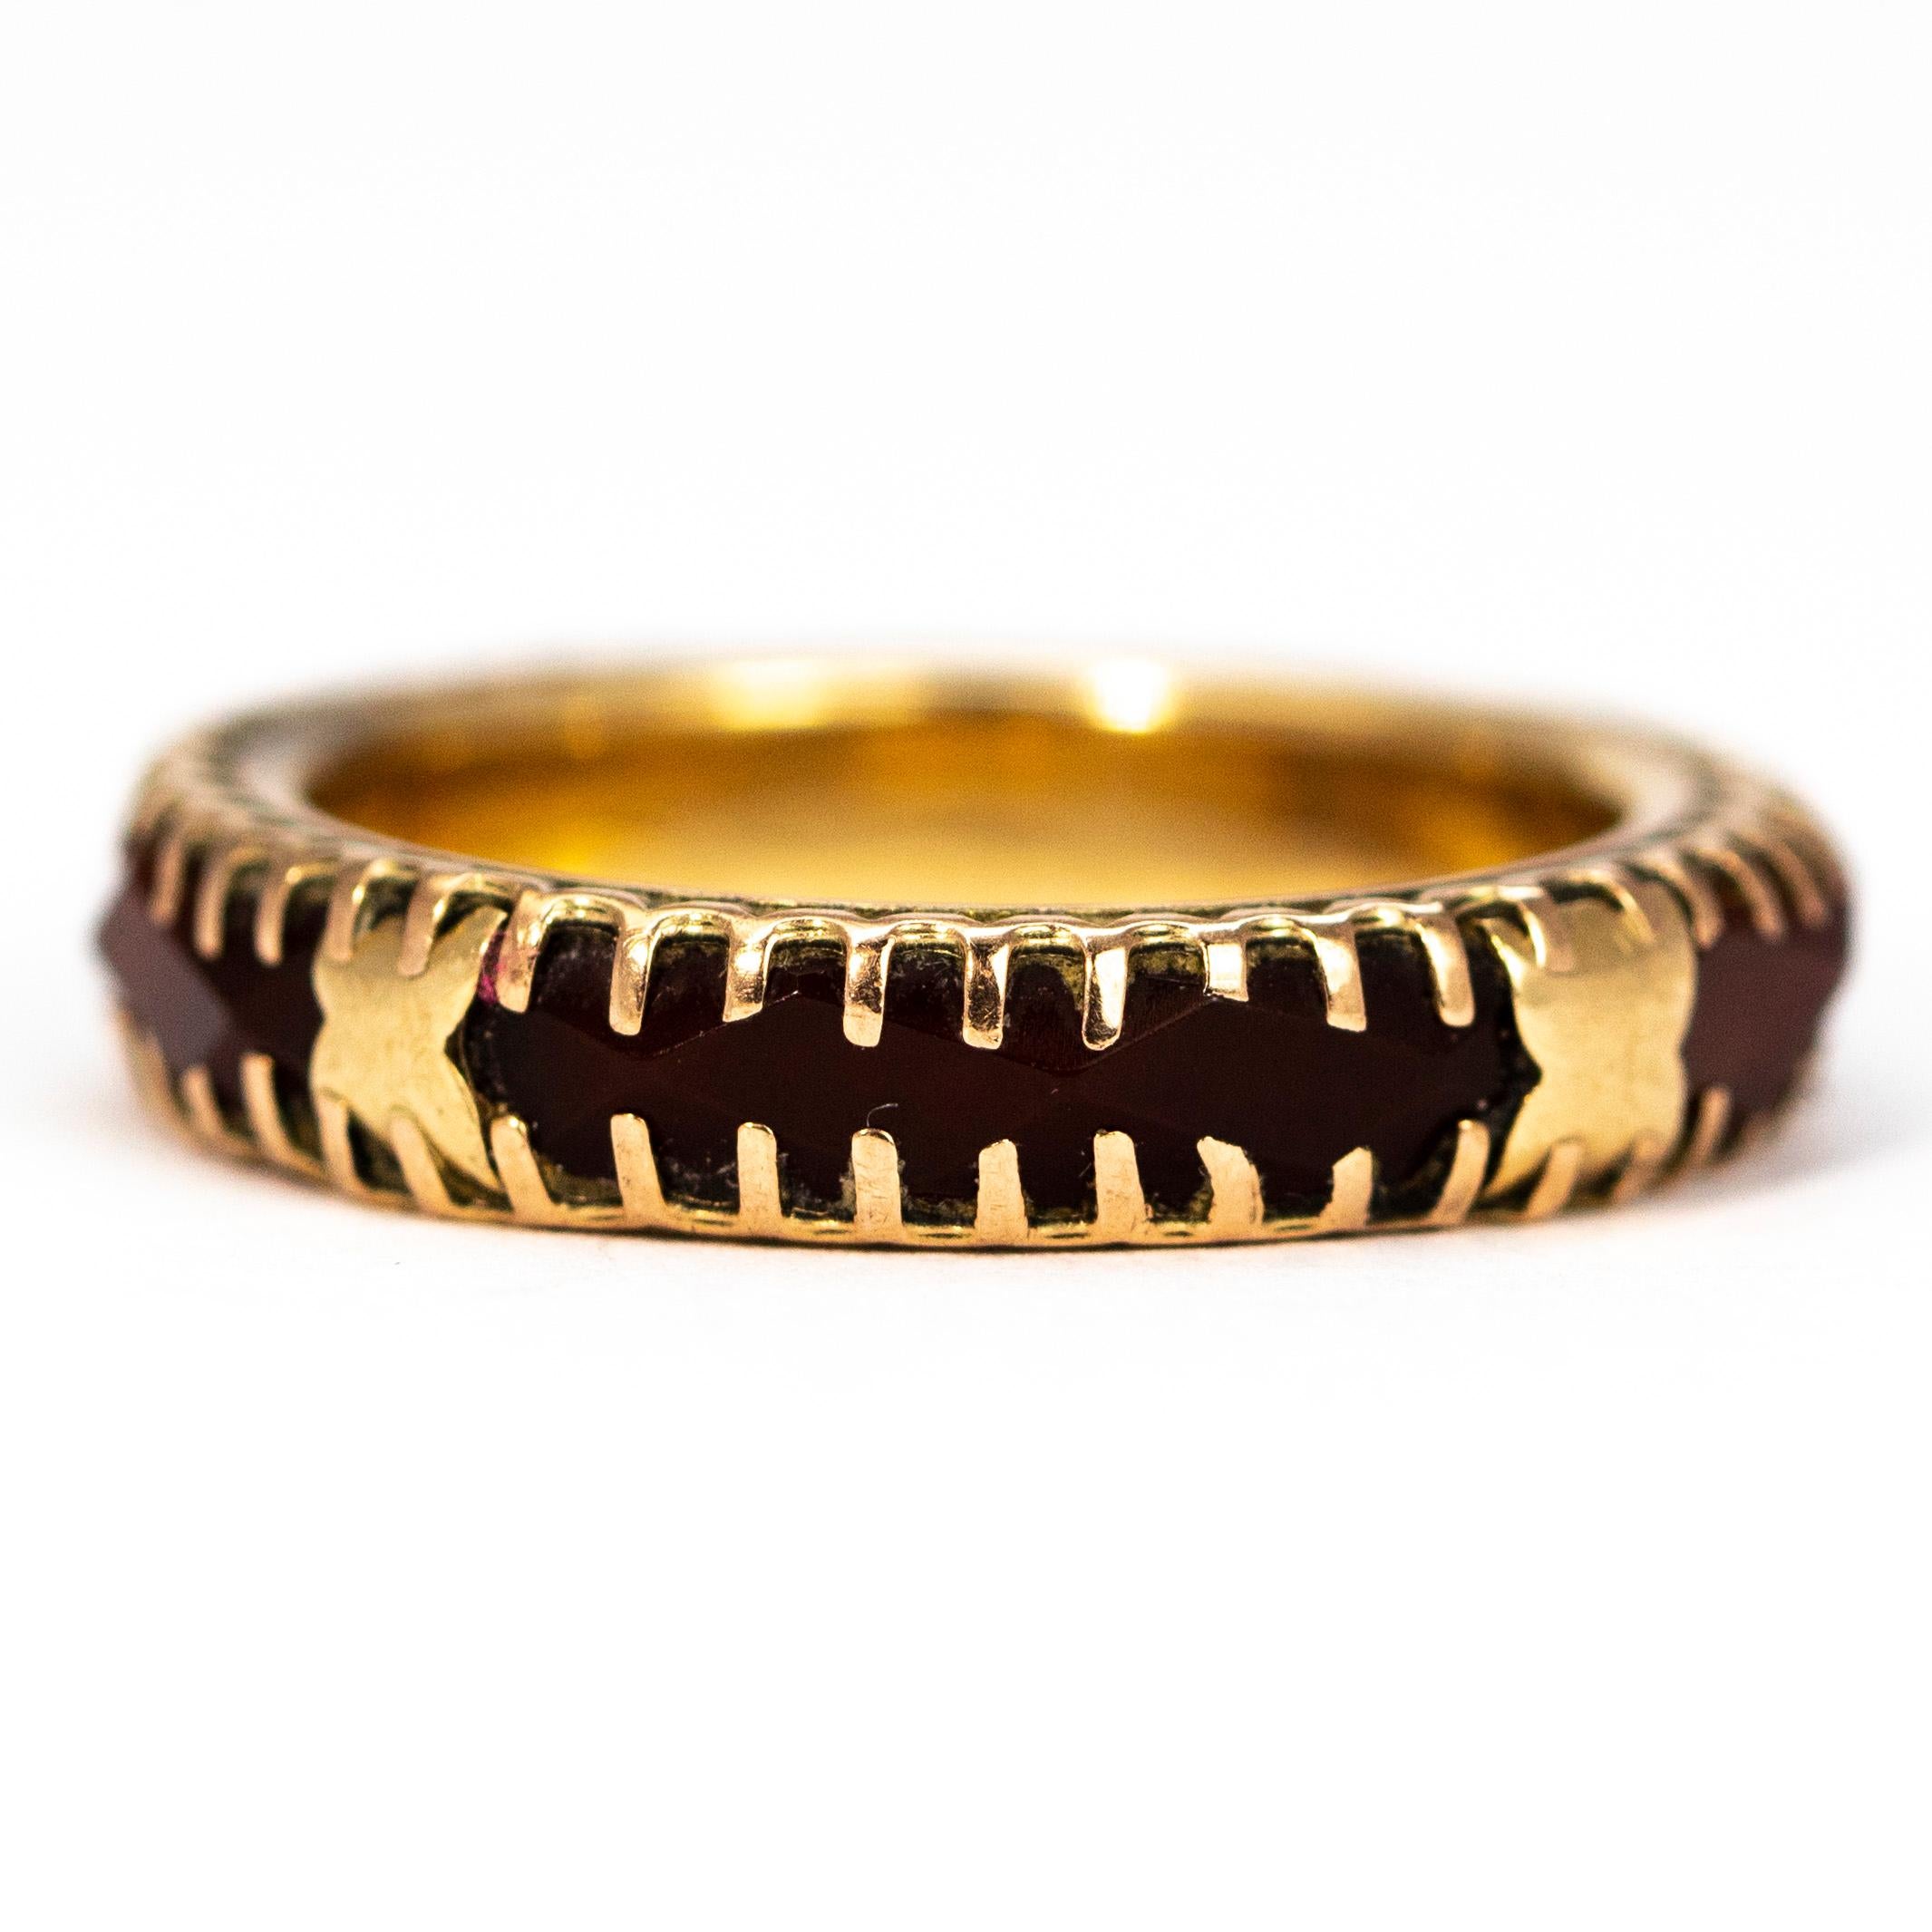 This wonderfully unusual eternity band is chunky and has so much detail. The carnelian stone carries all the way around this band and every now and then has a gold cross shape set over the top. The stones are held in place with prominent gold teeth